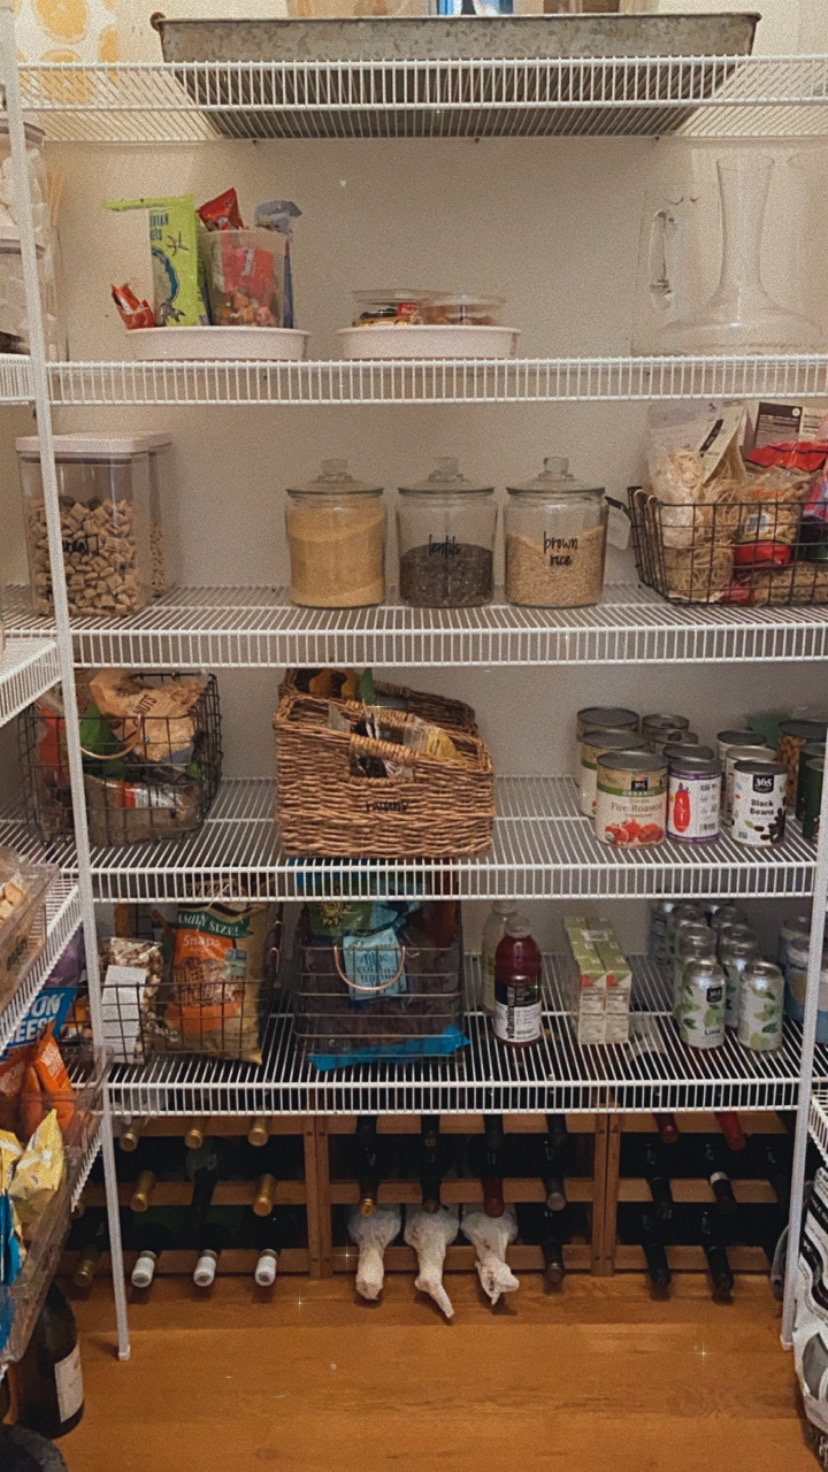 How to organize your pantry, get your pantry organized this year, simple organizing ideas for your kitchen 